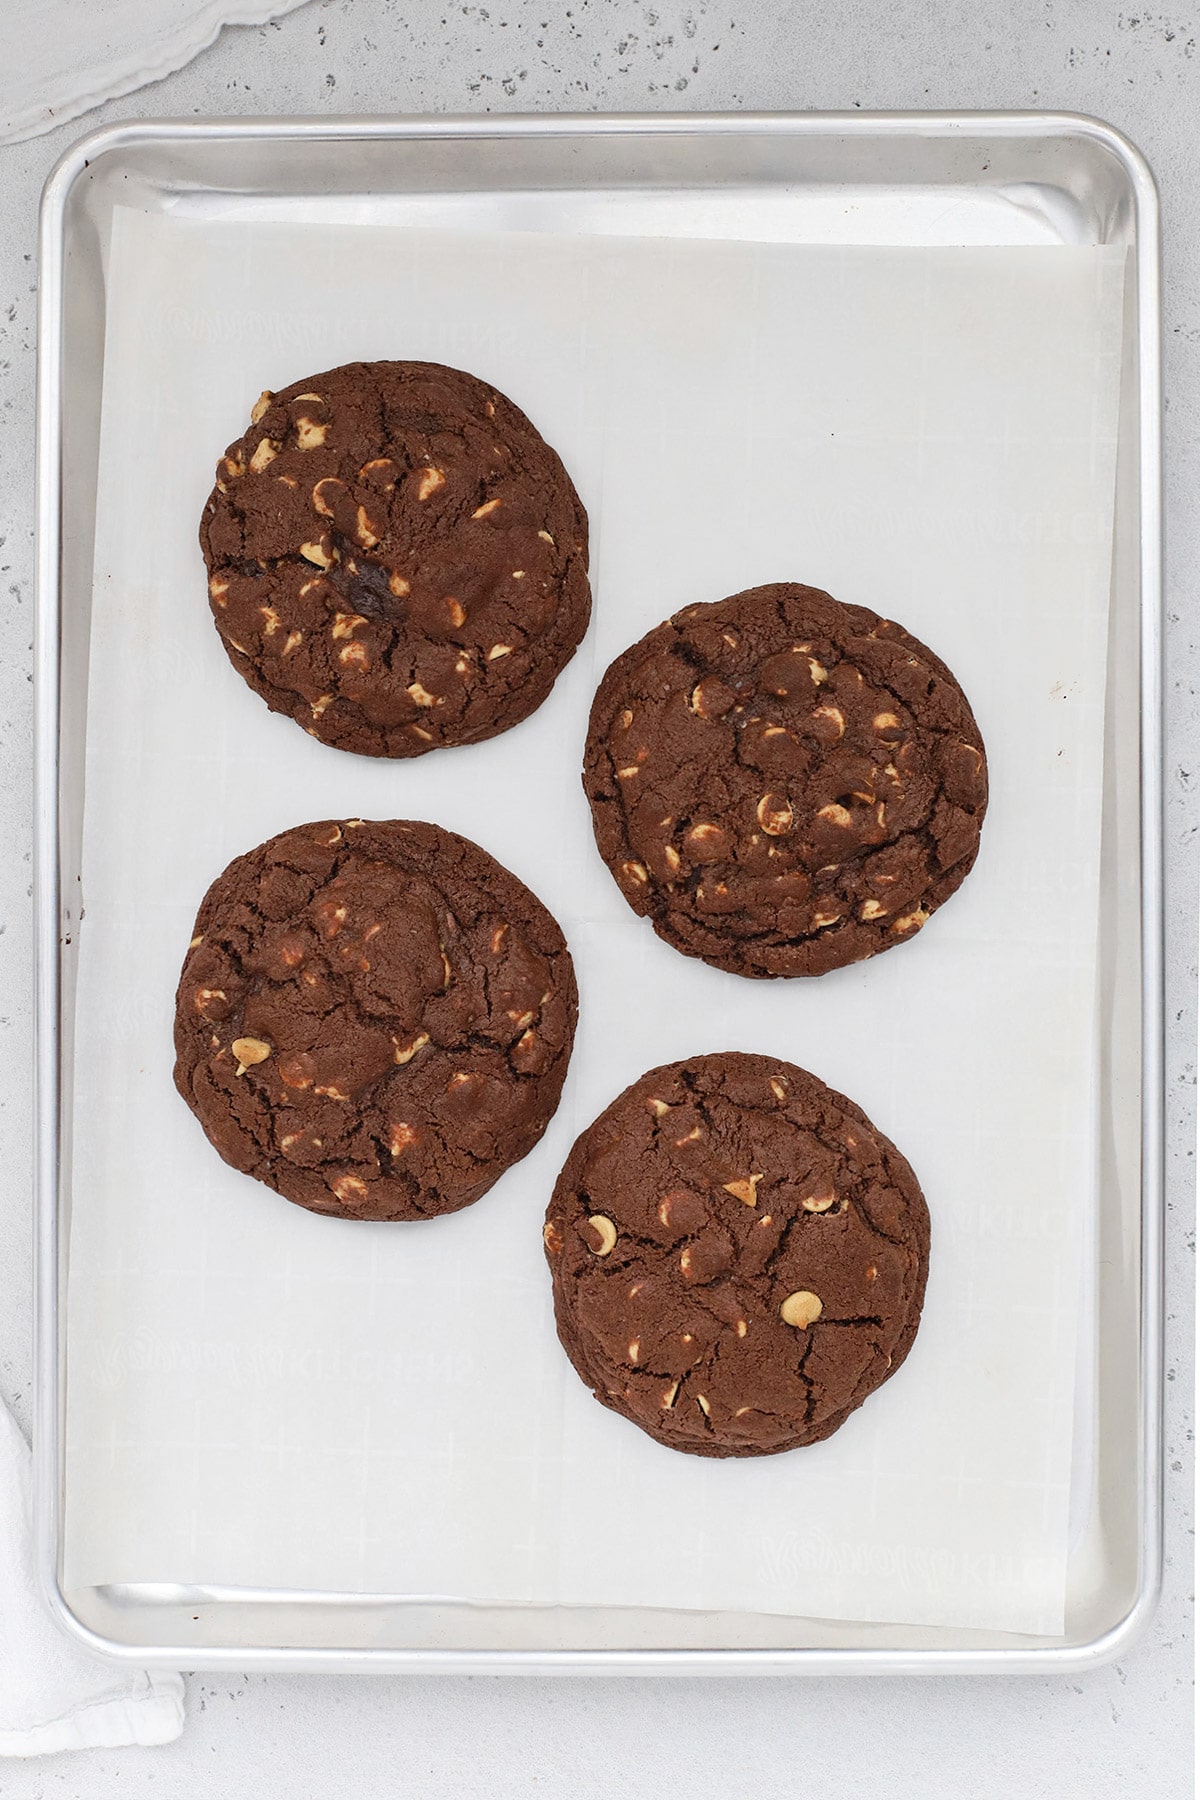 Freshly baked gluten-free levain chocolate peanut butter chip cookies